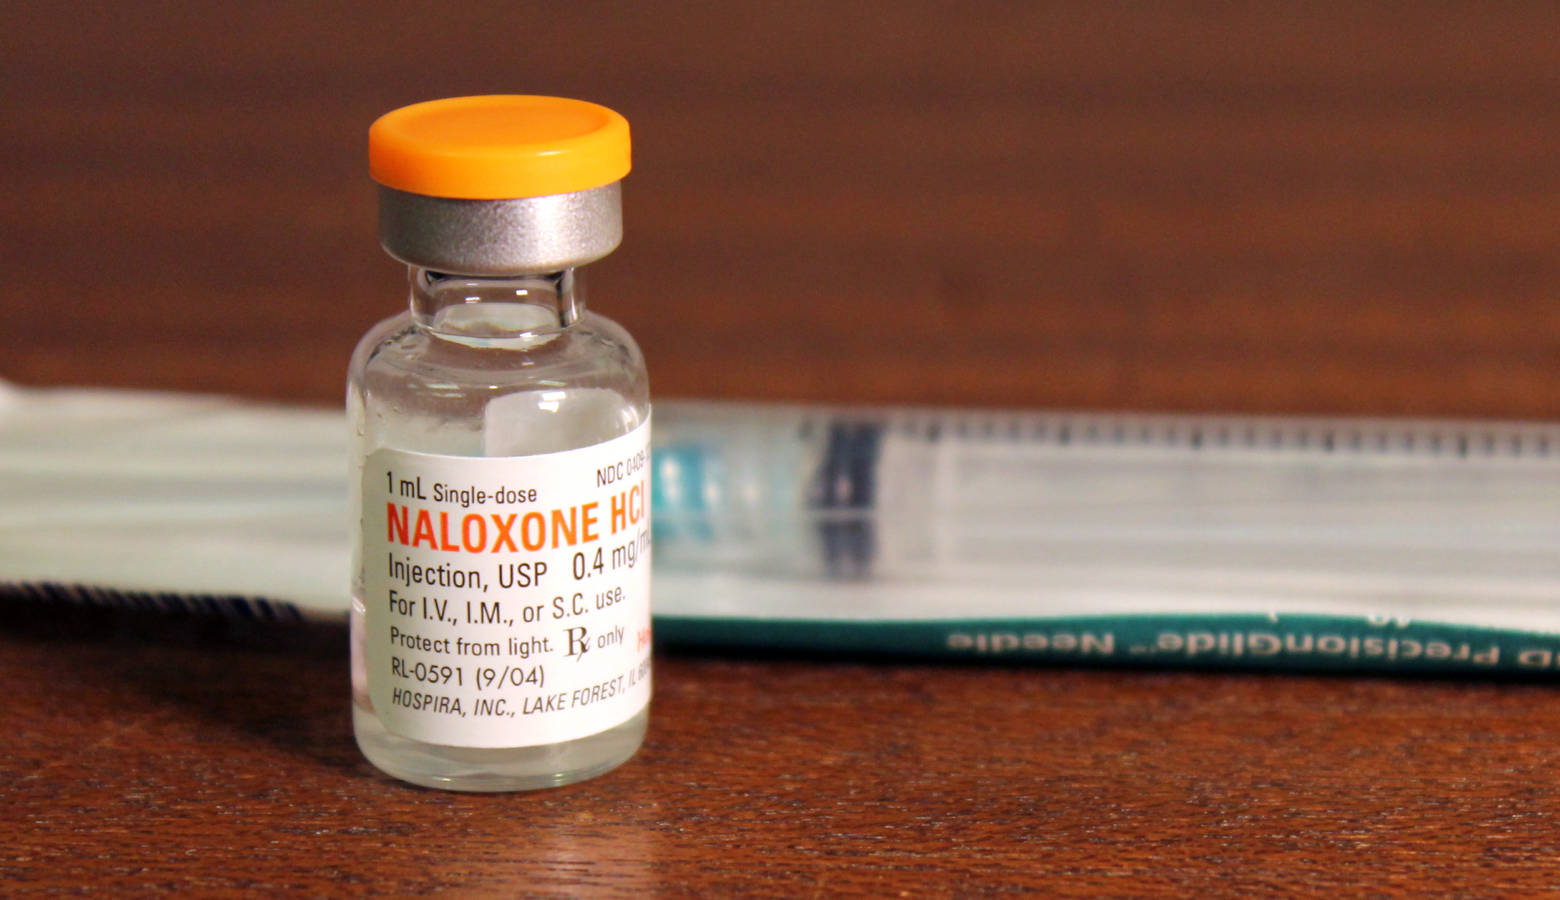 A new map tracks where and how frequently emergency responders administer naloxone, the opioid overdose antidote. (Lauren Chapman/IPB News)